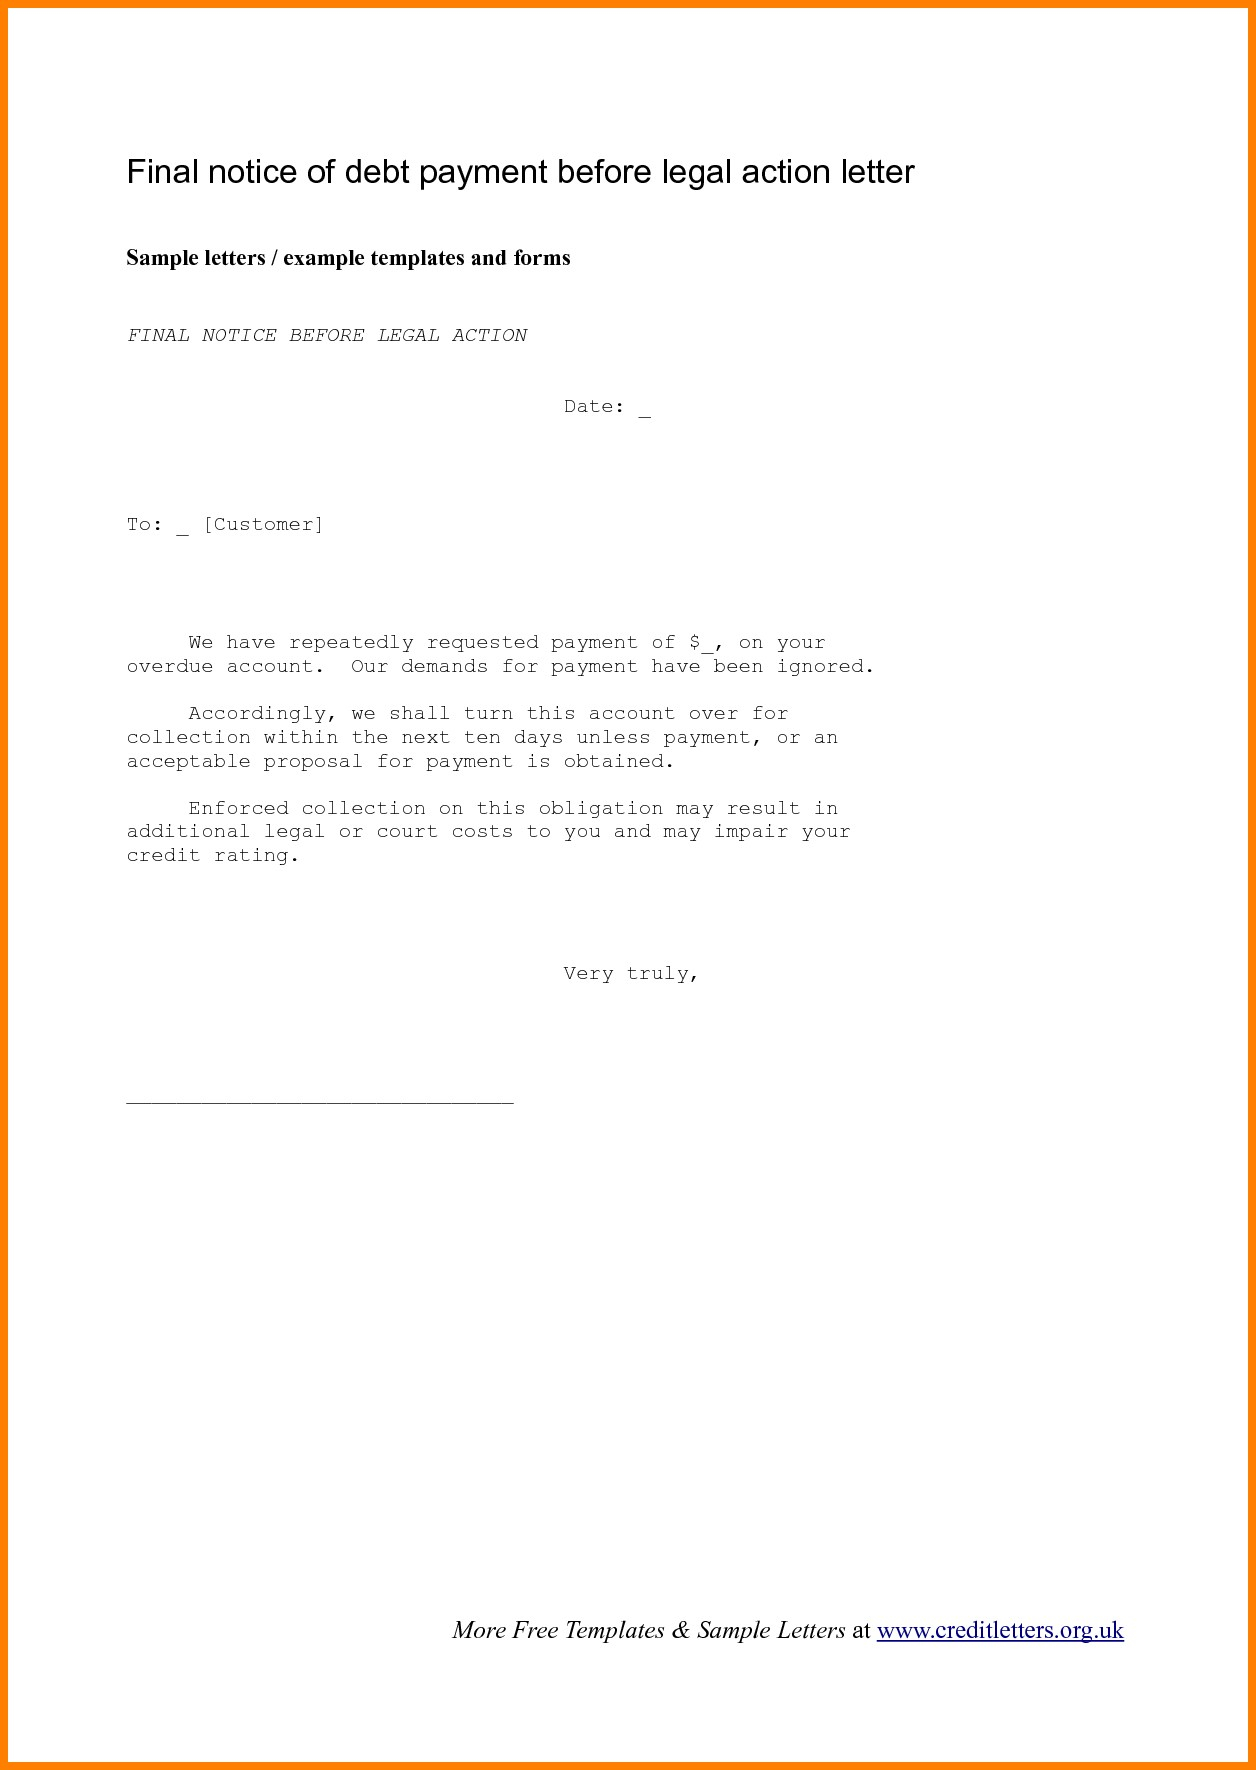 final notice before legal action letter template uk Collection-legal action letter format fresh 10 legal notice letter format 8-p